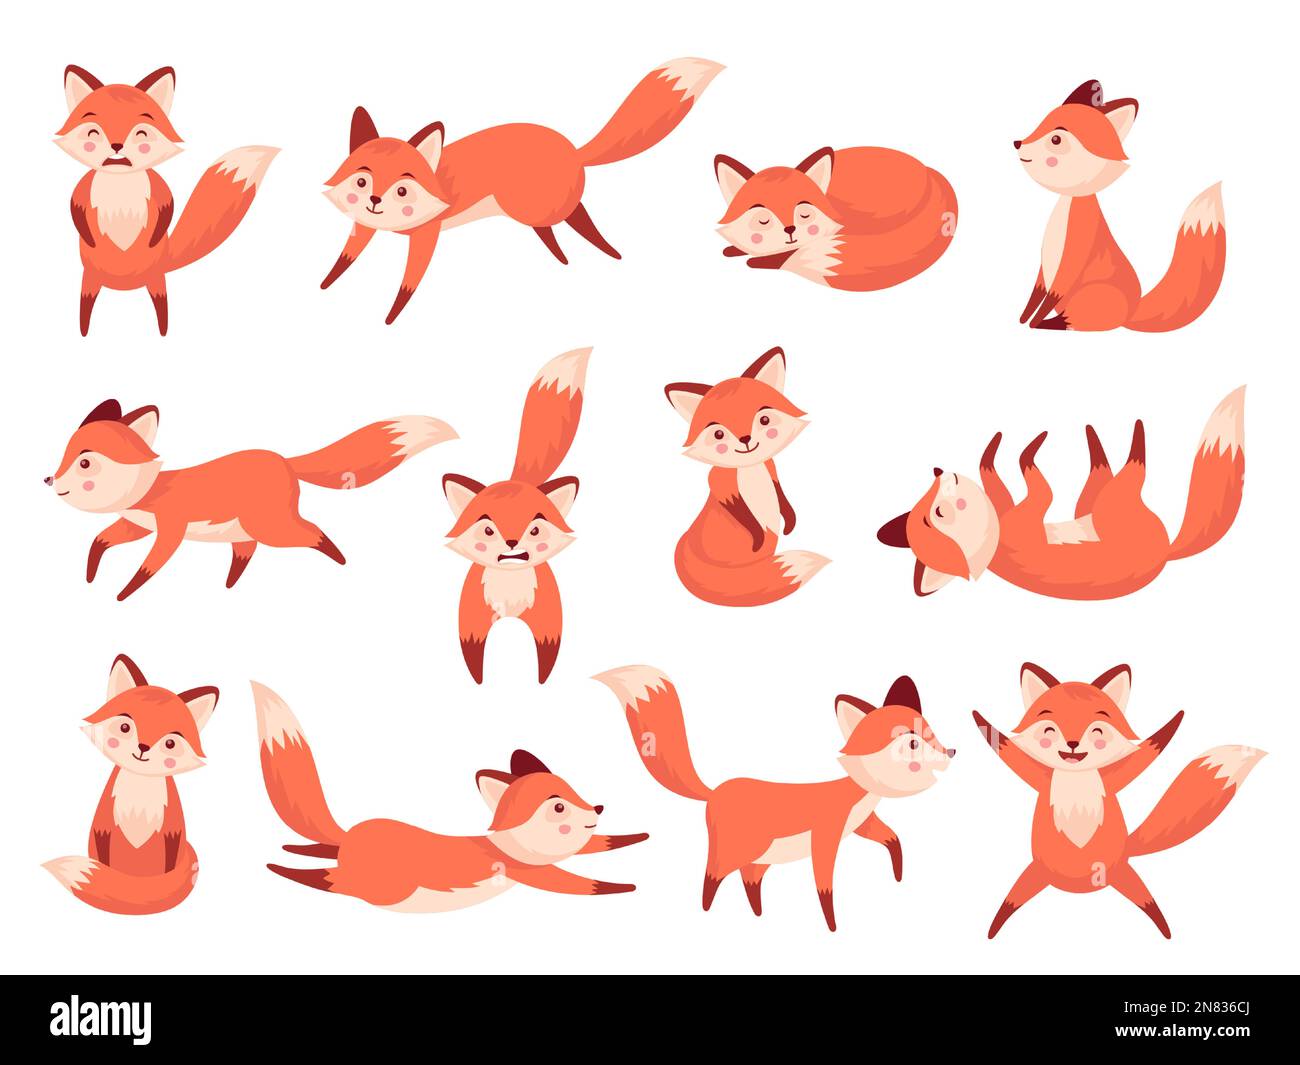 Cute fox. Cartoon red forest animals with various emotions, funny crafty carnivorous predators in different poses wildlife zoo concept. Vector flat Stock Vector